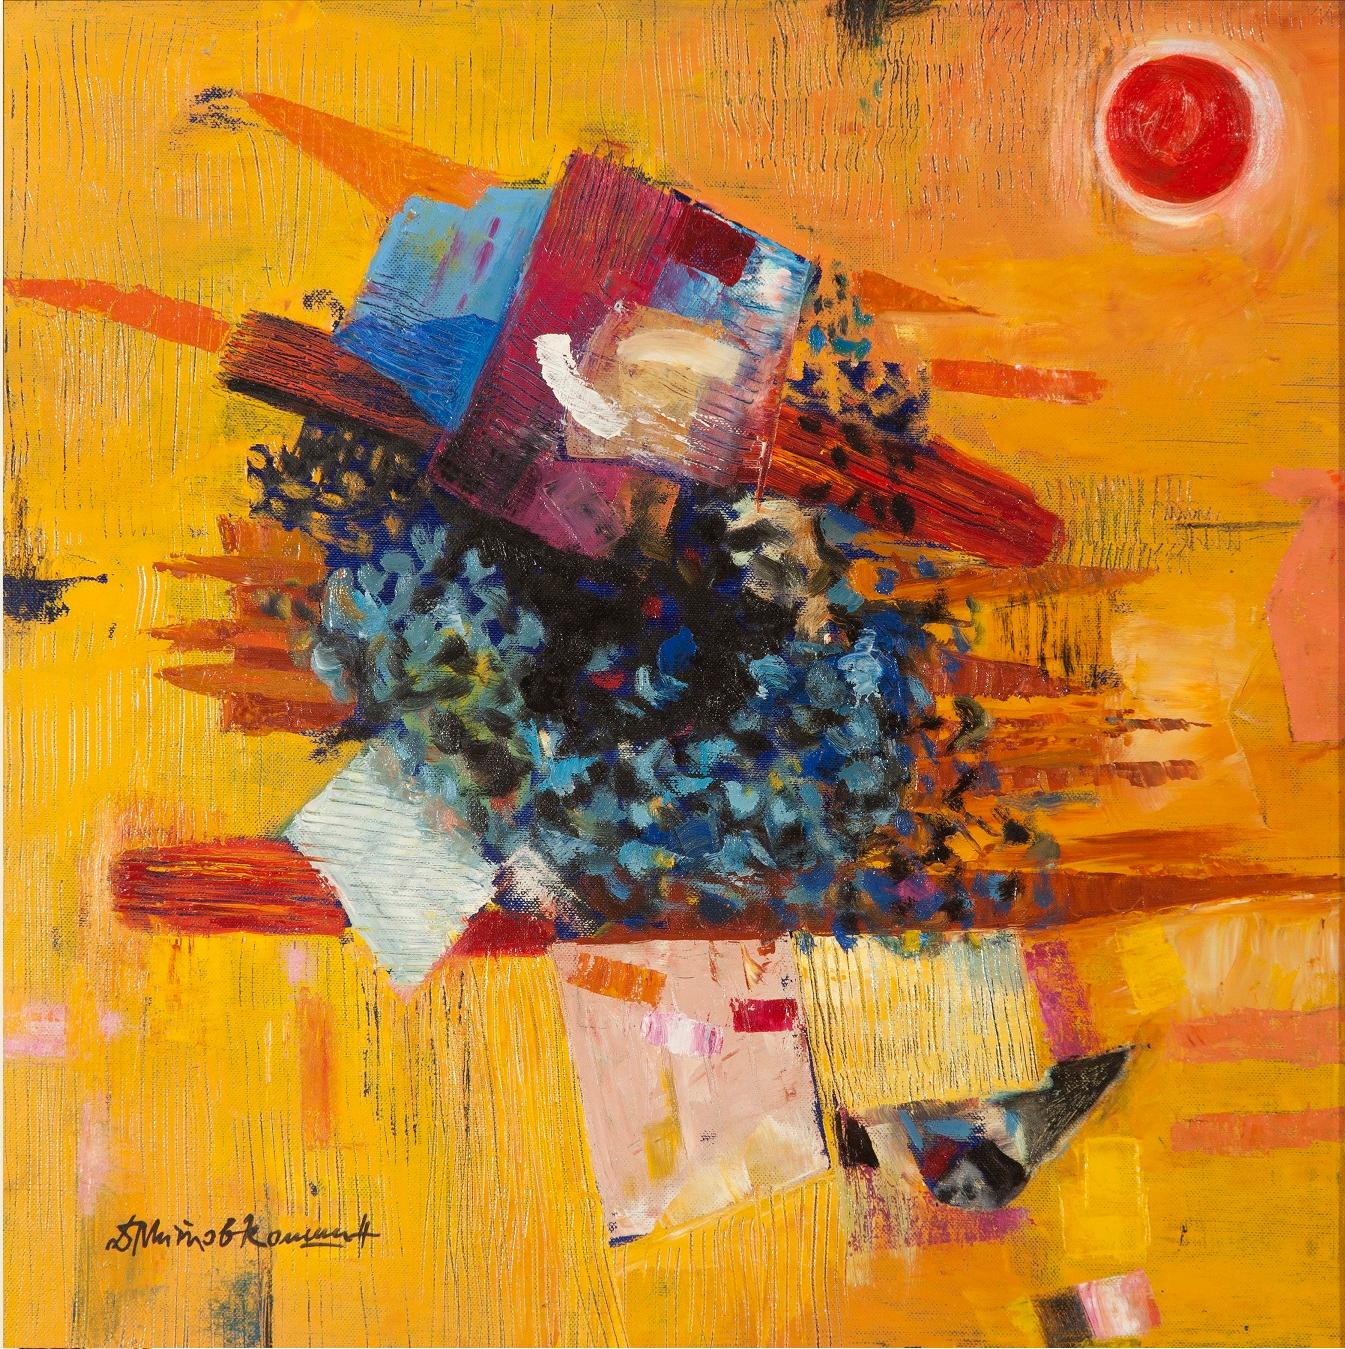 Dimitar Mitov - Komshin  Abstract Painting - Abstract Red Sun - Abstract Oil Painting Blue Brown White Red Orange Yellow